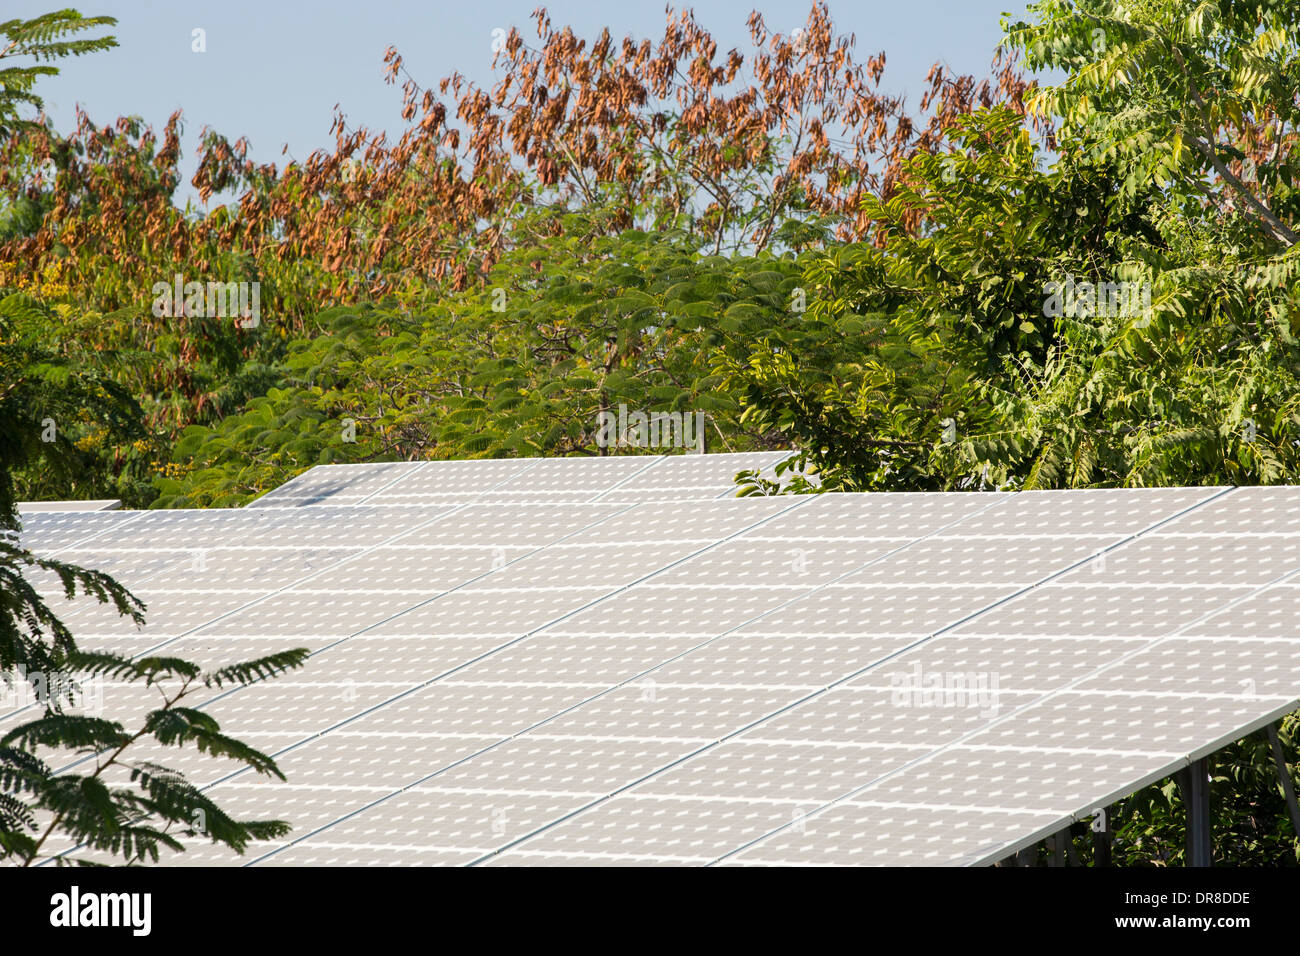 Solar panels providing electricity at the Barefoot College in Tilonia, Rajasthan, India. Stock Photo